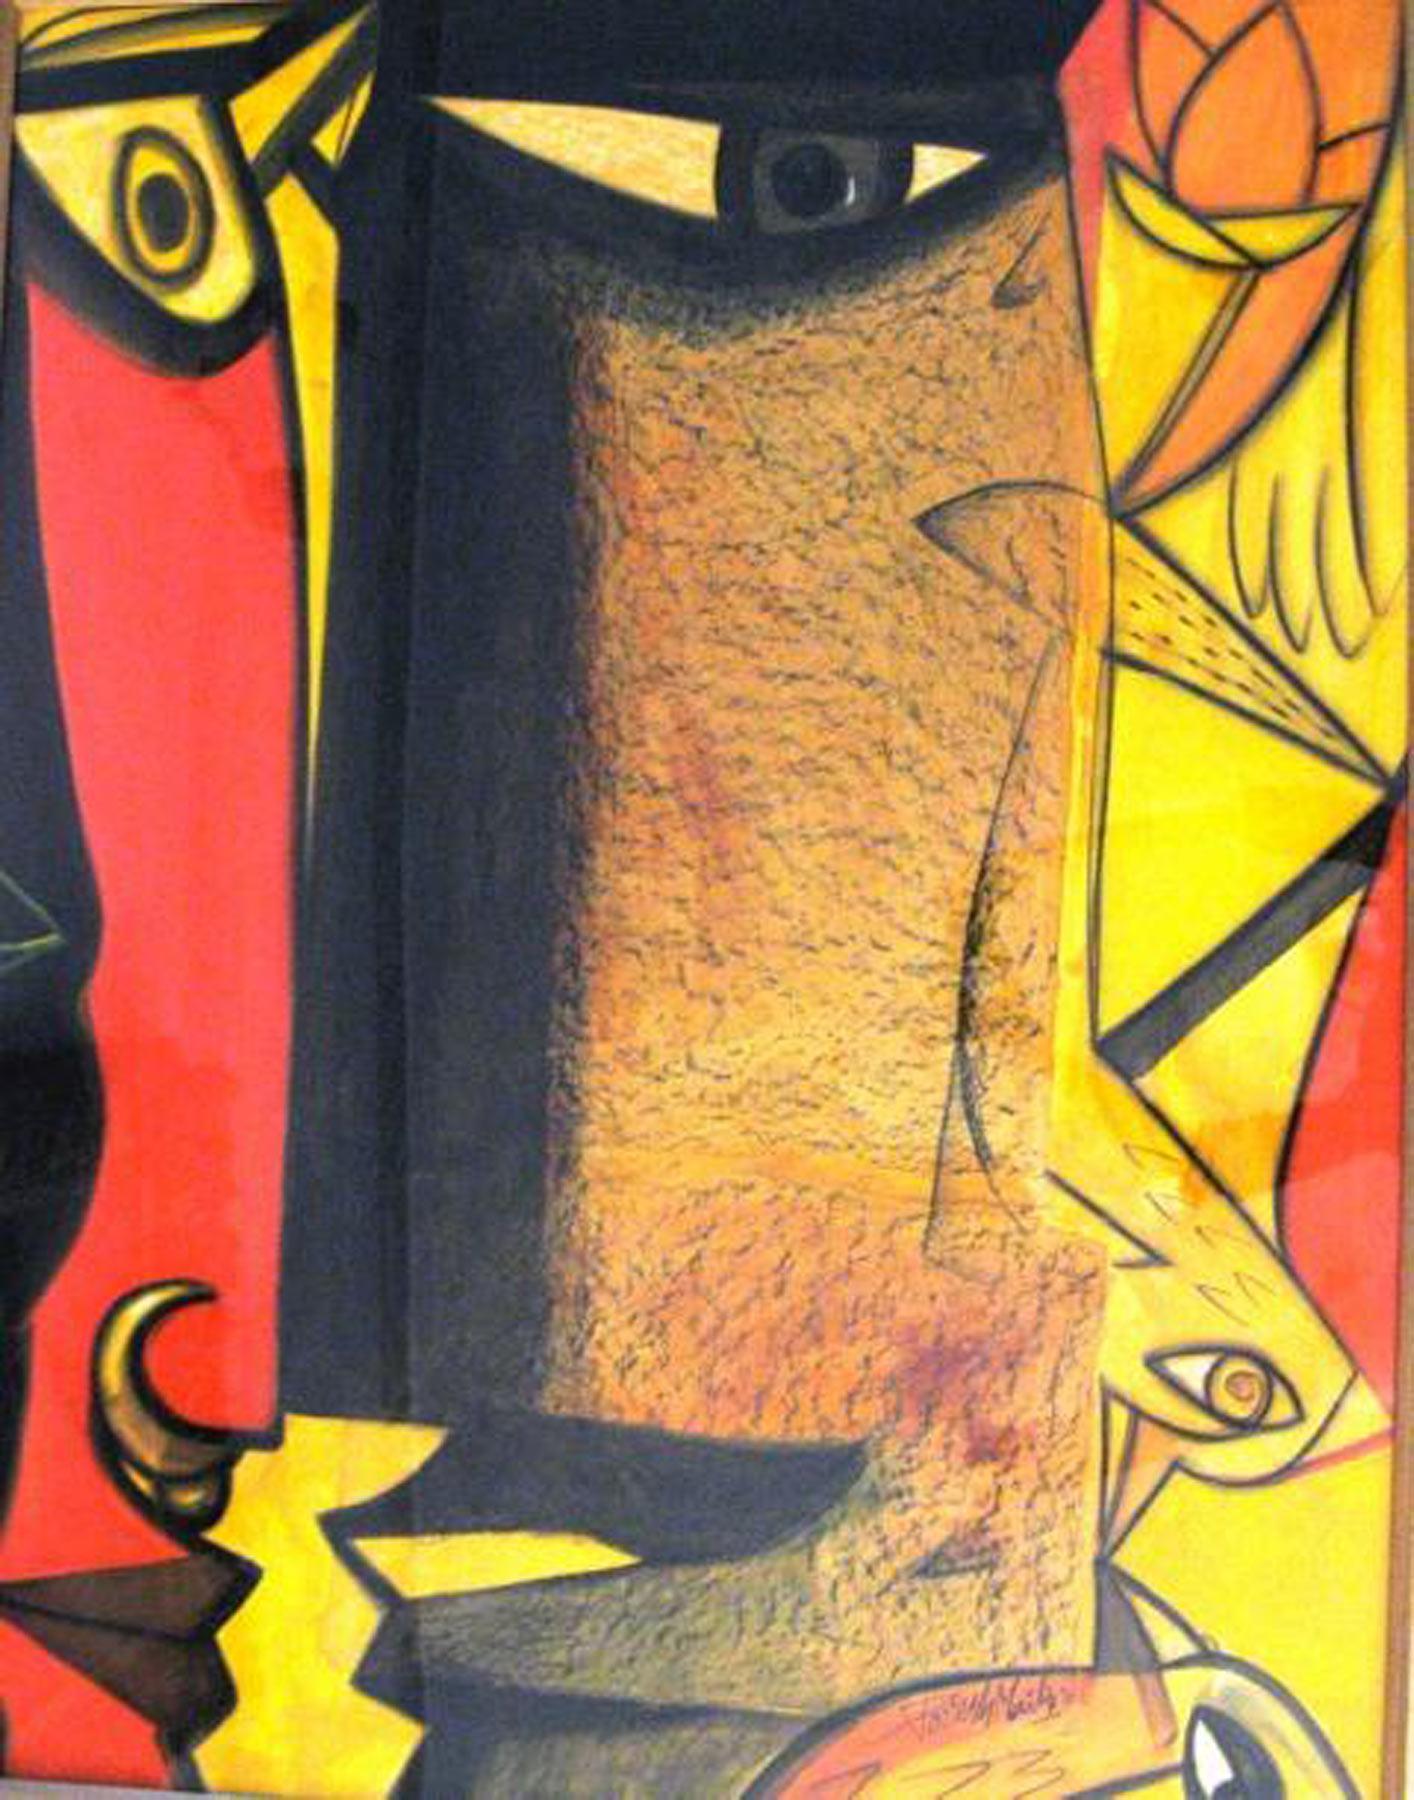 Mixed Media Painting, Red, Yellow, Brown, Blackcolors by Indian Artist"In Stock"